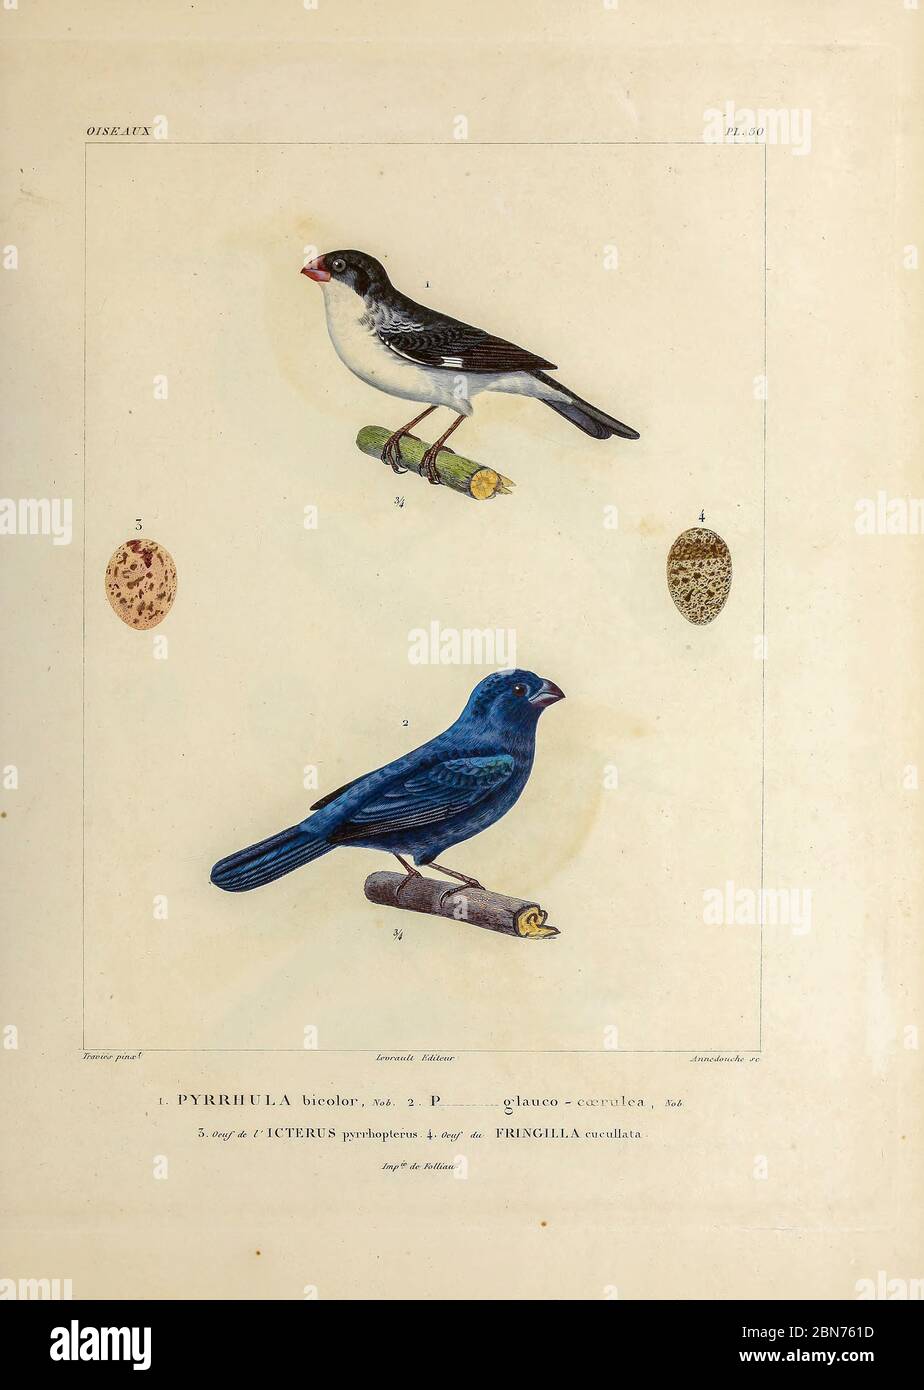 hand coloured sketch Top: Subspecies of White-bellied Seedeater (Sporophila leucoptera bicolor [Here as Pyrrhula bicolor]) Bottom: glaucous-blue grosbeak or Indigo Grosbeak (Cyanoloxia glaucocaerulea [Here as Pyrrhula glauco-coerulea]) From the book 'Voyage dans l'Amérique Méridionale' [Journey to South America: (Brazil, the eastern republic of Uruguay, the Argentine Republic, Patagonia, the republic of Chile, the republic of Bolivia, the republic of Peru), executed during the years 1826 - 1833] 4th volume Part 3 By: Orbigny, Alcide Dessalines d', d'Orbigny, 1802-1857; Montagne, Jean François Stock Photo